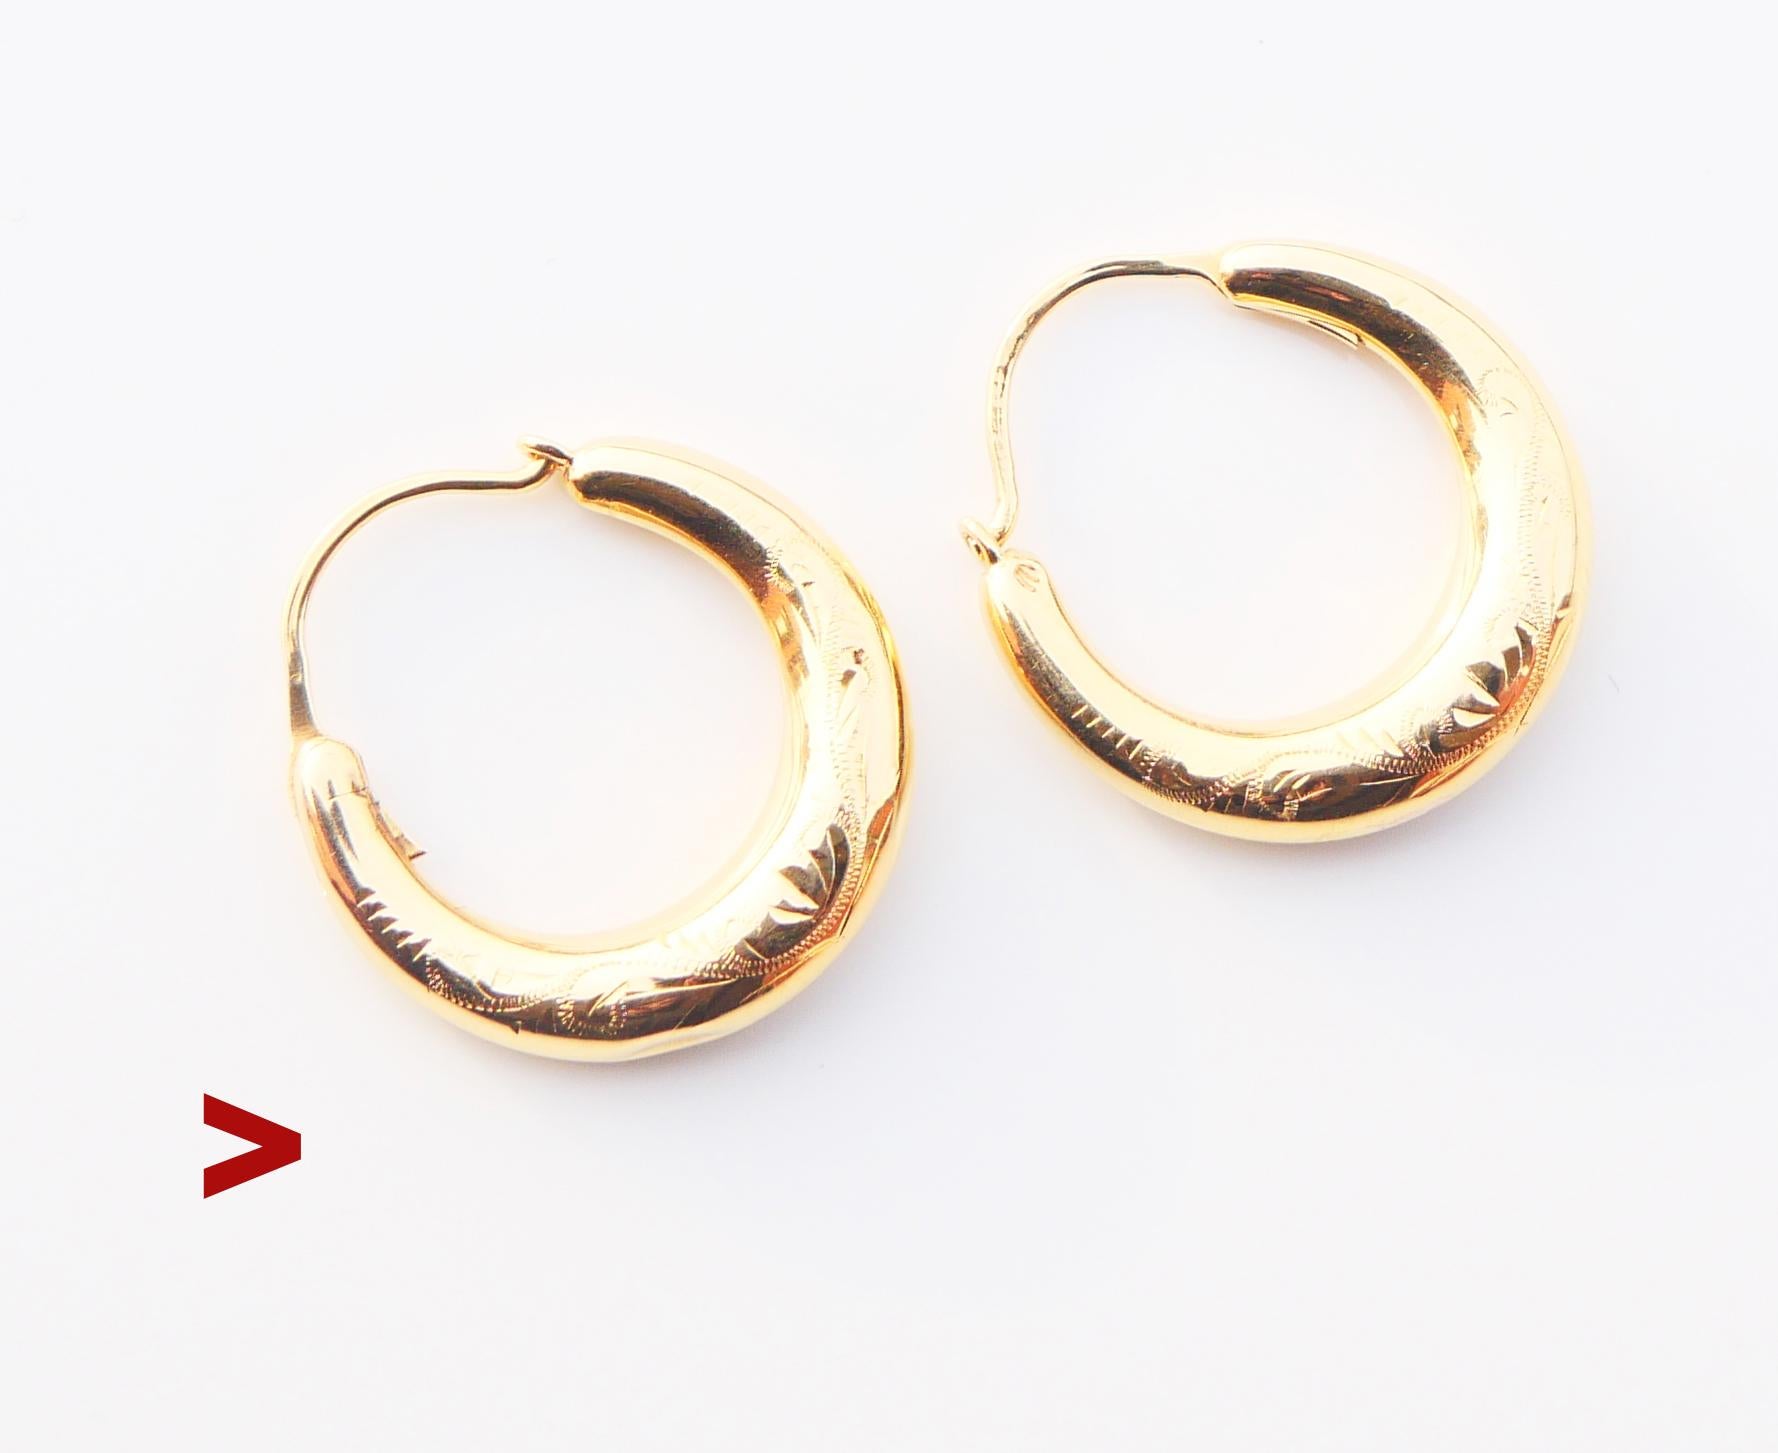 A pair of dangles with faceted parts in solid 21K Yellow Gold. Origin : likely Middle East.

Tested solid 21K Gold. Fine used condition, no dents or other damages, no repairs.

Each ring is 38 mm long including the hanger. Each ball Ø 7.5